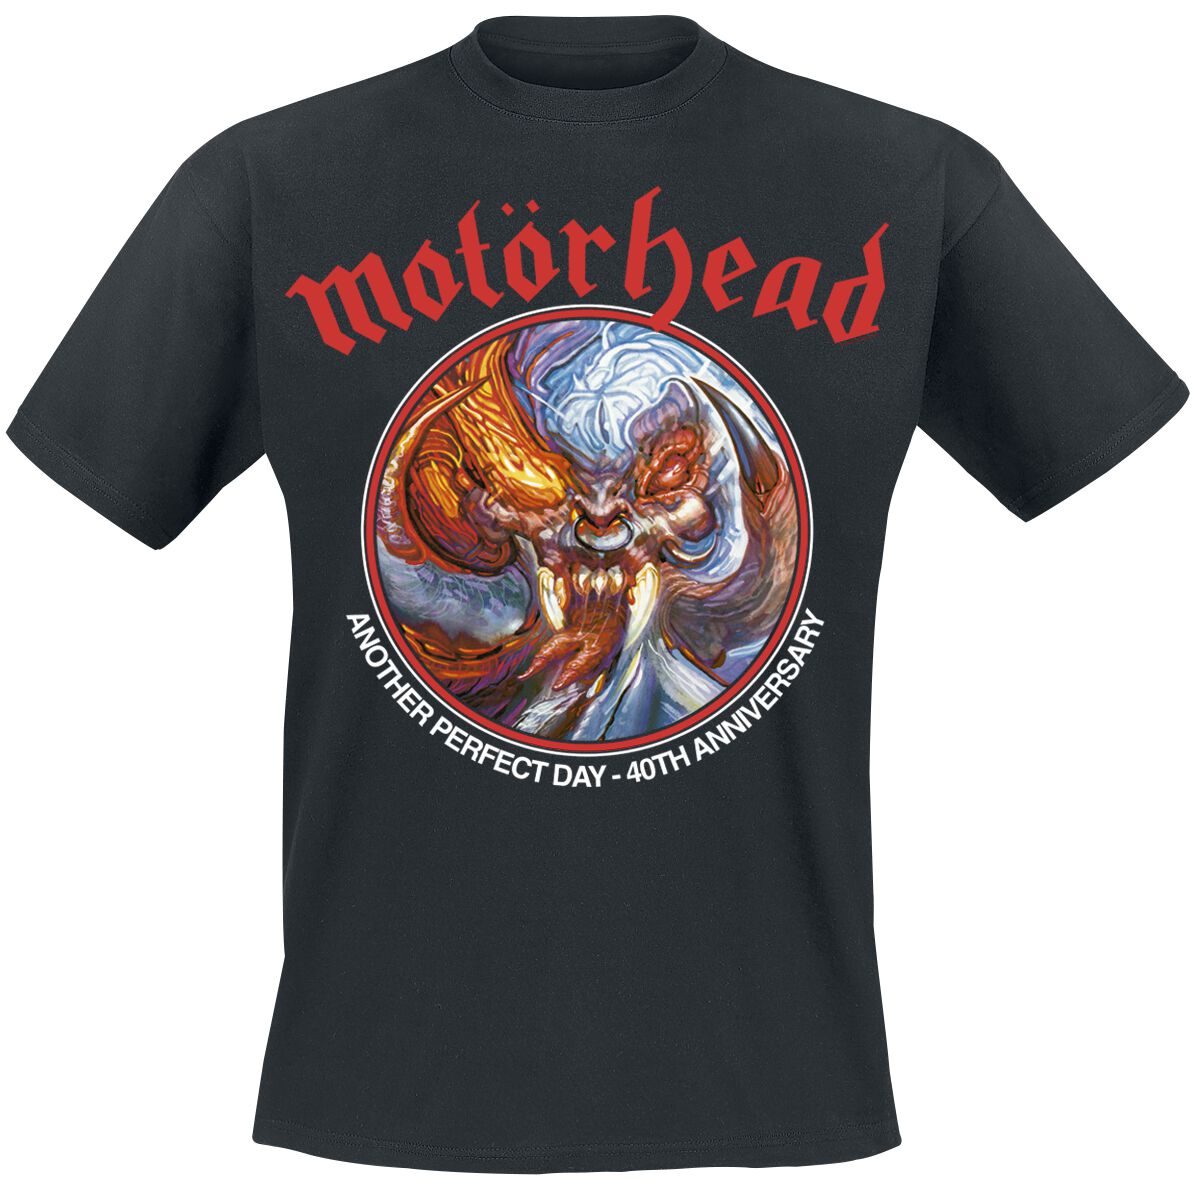 Motörhead Another Perfect Day Anniversary T-Shirt schwarz in M